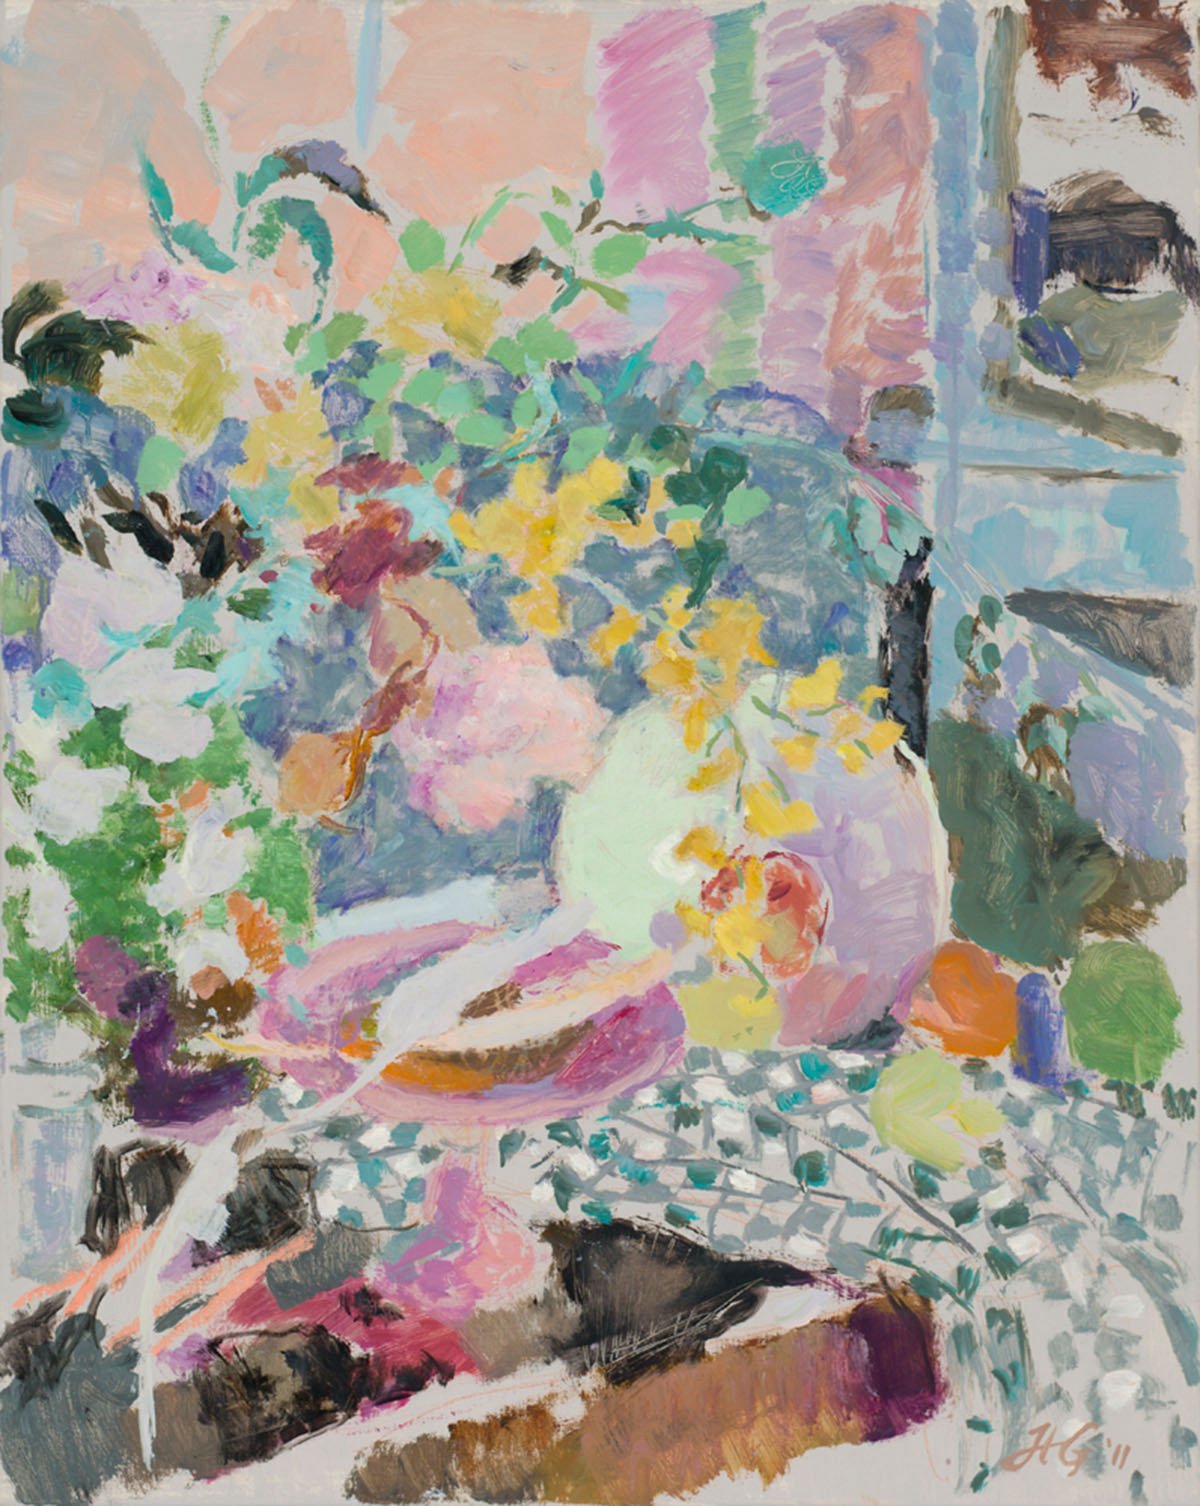 Hugo Grenville, Still Life in Pink, Green and Grey